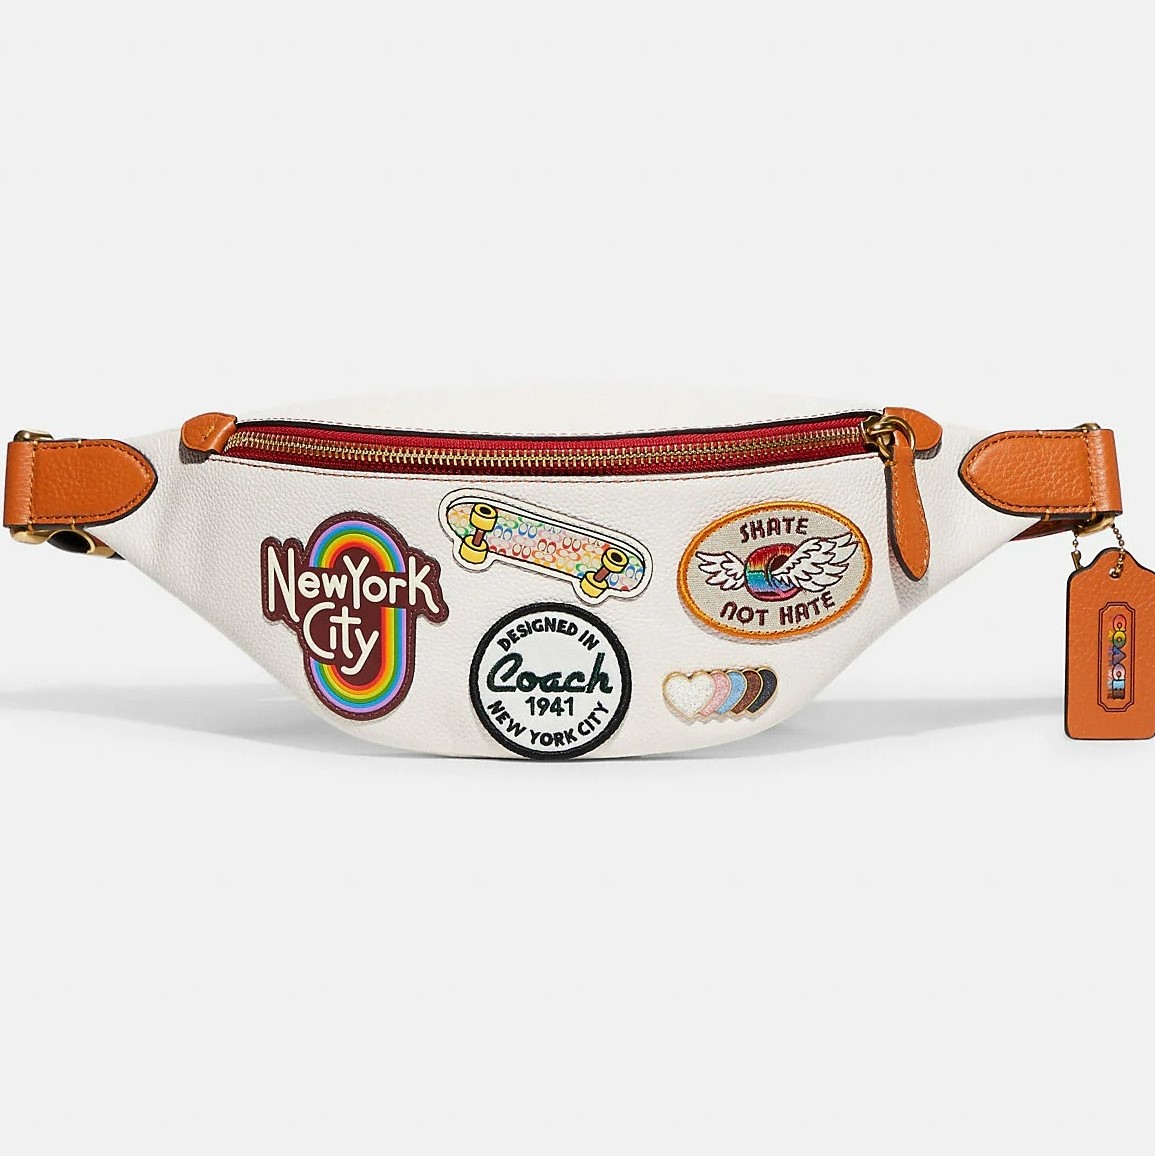 TÚI BAO TỬ COACH NEW YORK CITY CHARTER BELT BAG 7 WITH PATCHES 11